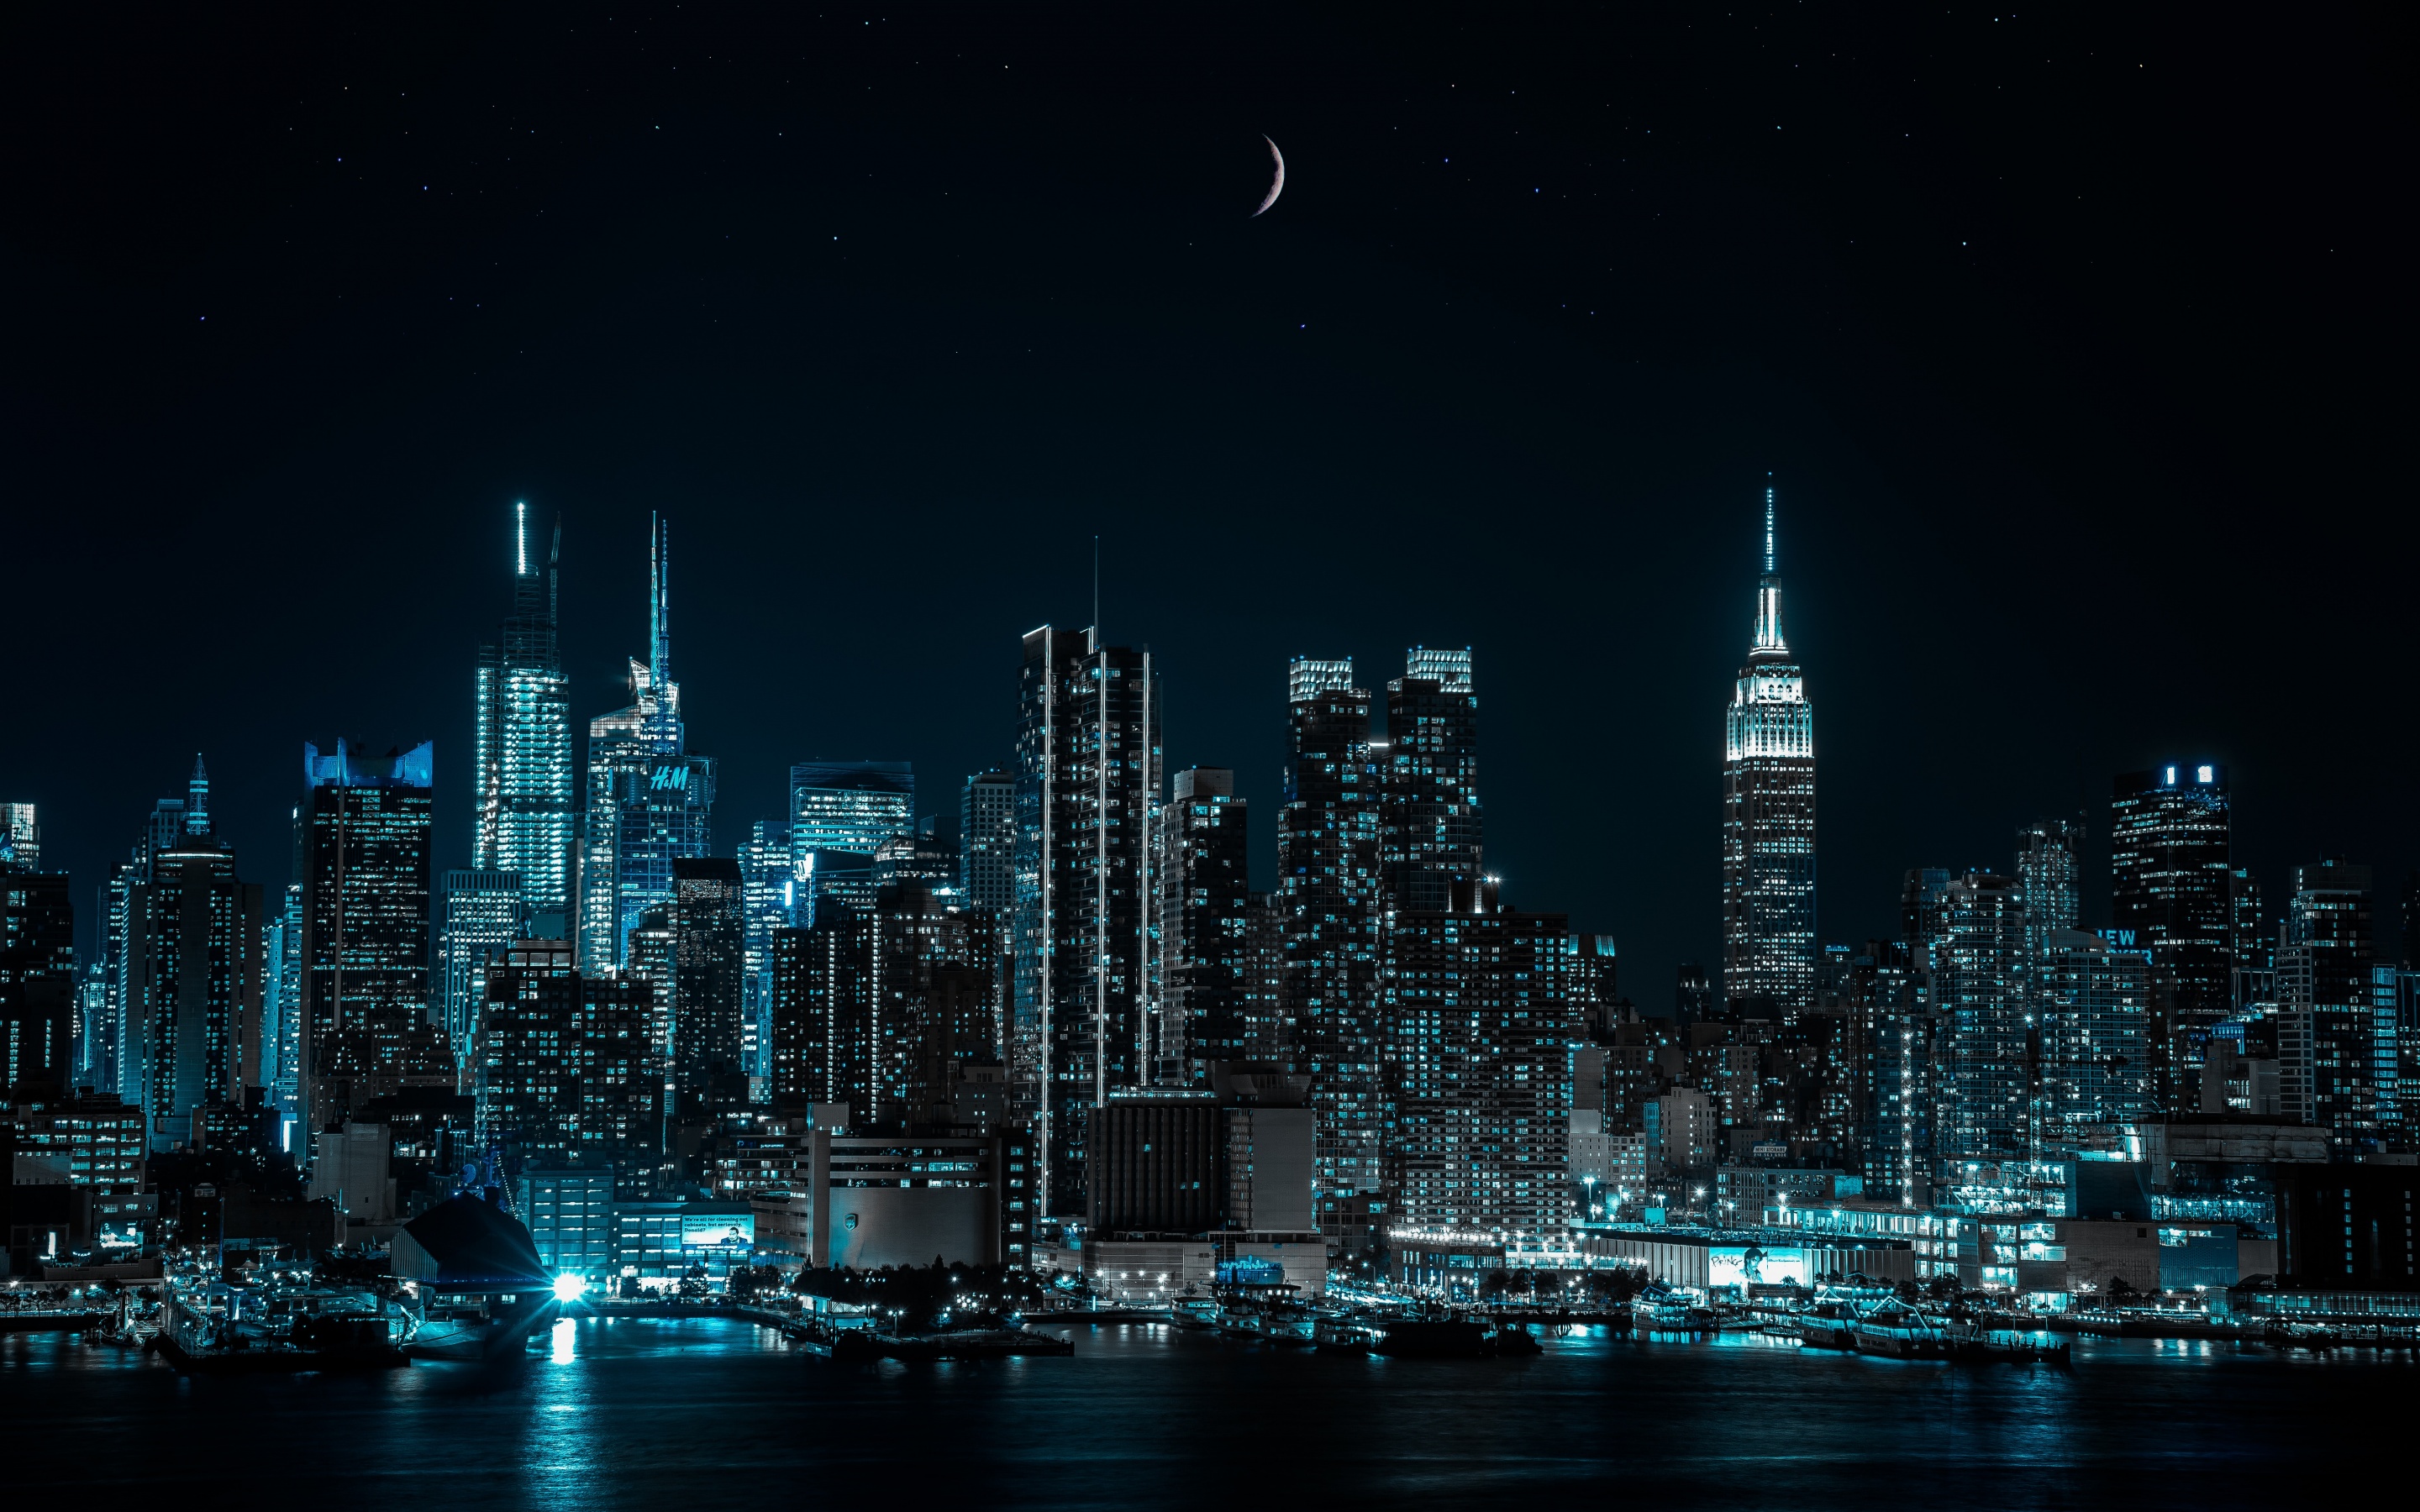 25 Free Aesthetic New York Wallpapers For iPhone That You'll Love